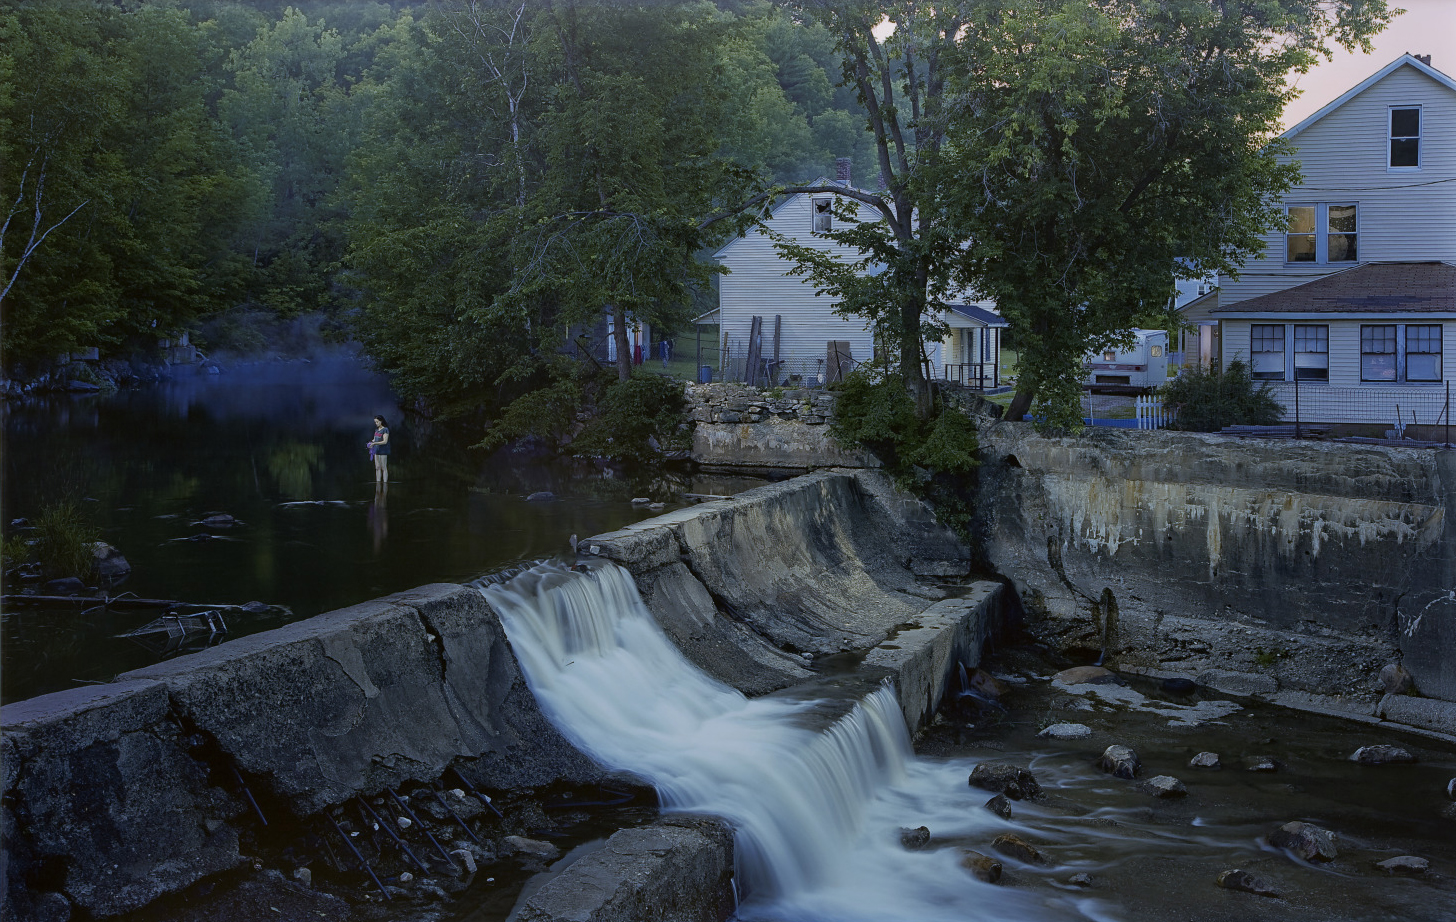 Gregory Crewdson, Untitled (natural bridge) (Sin título [puente natural]), 2007. Archival inkjet print, printed on Epson Premium Luster paper. Gift of Joy and Jerry Monkarsh in honor of the Museum's 50th Anniversary.